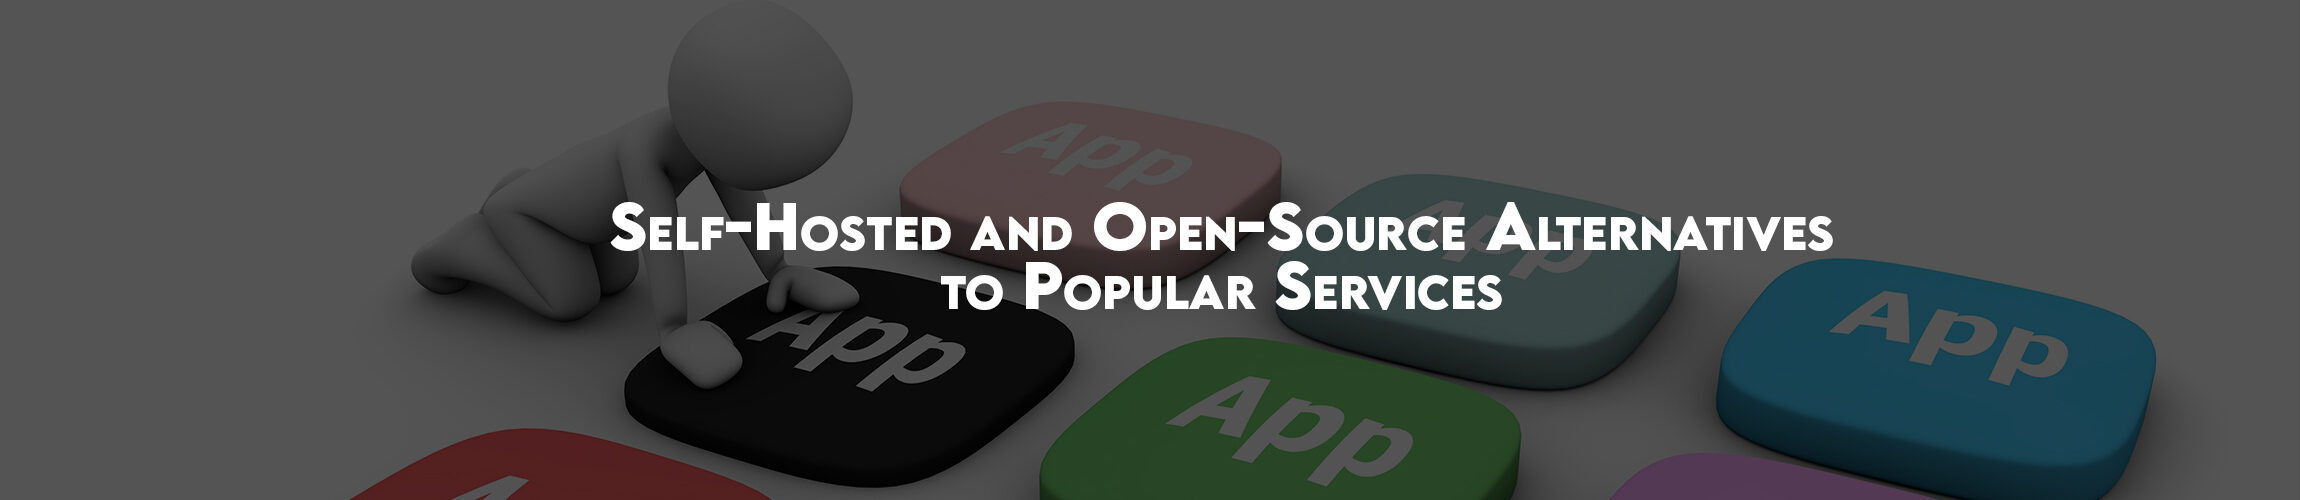 Self-Hosted and Open-Source Alternatives to Popular Services